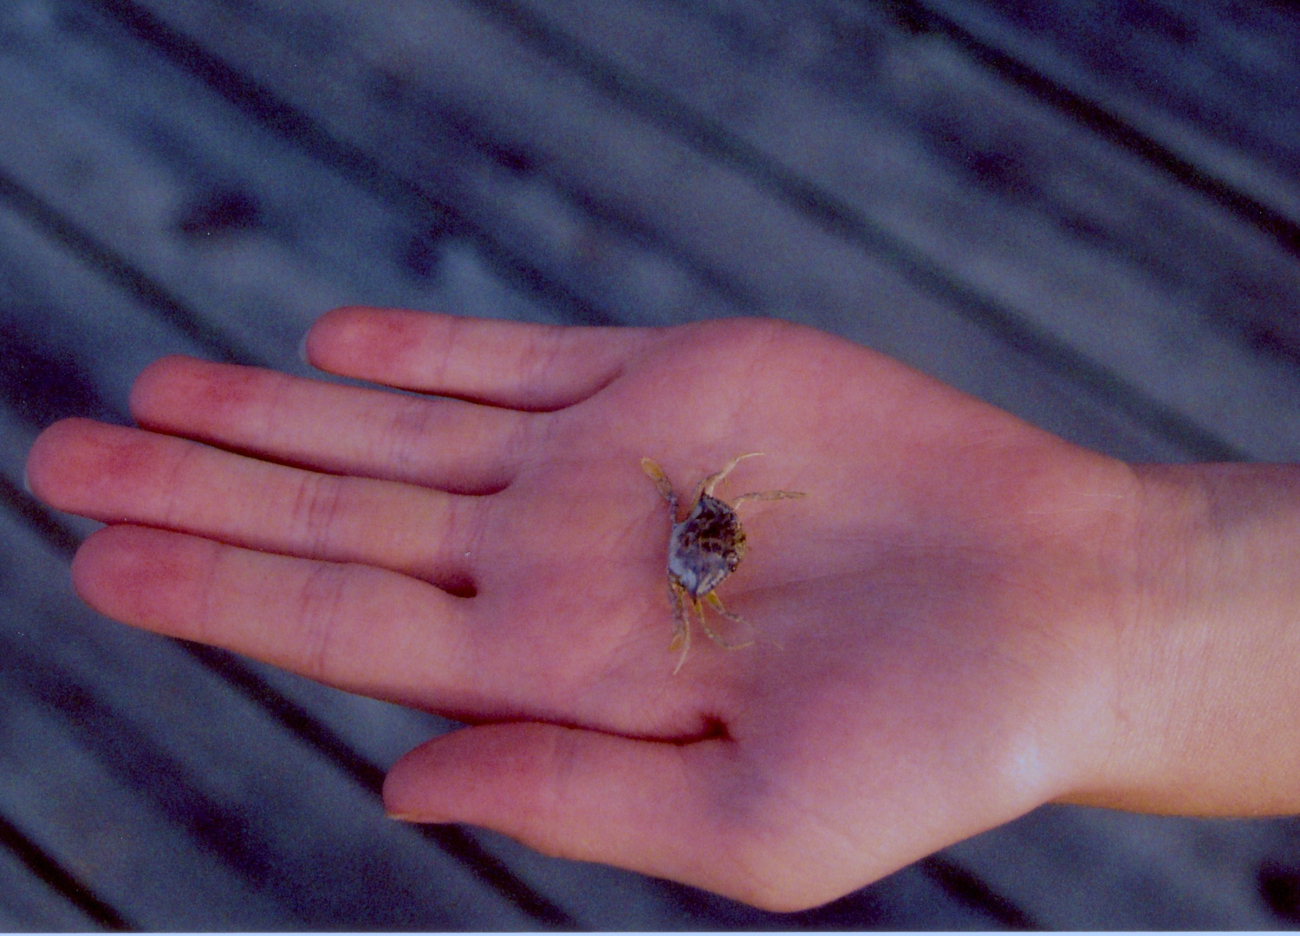 A baby blue crab